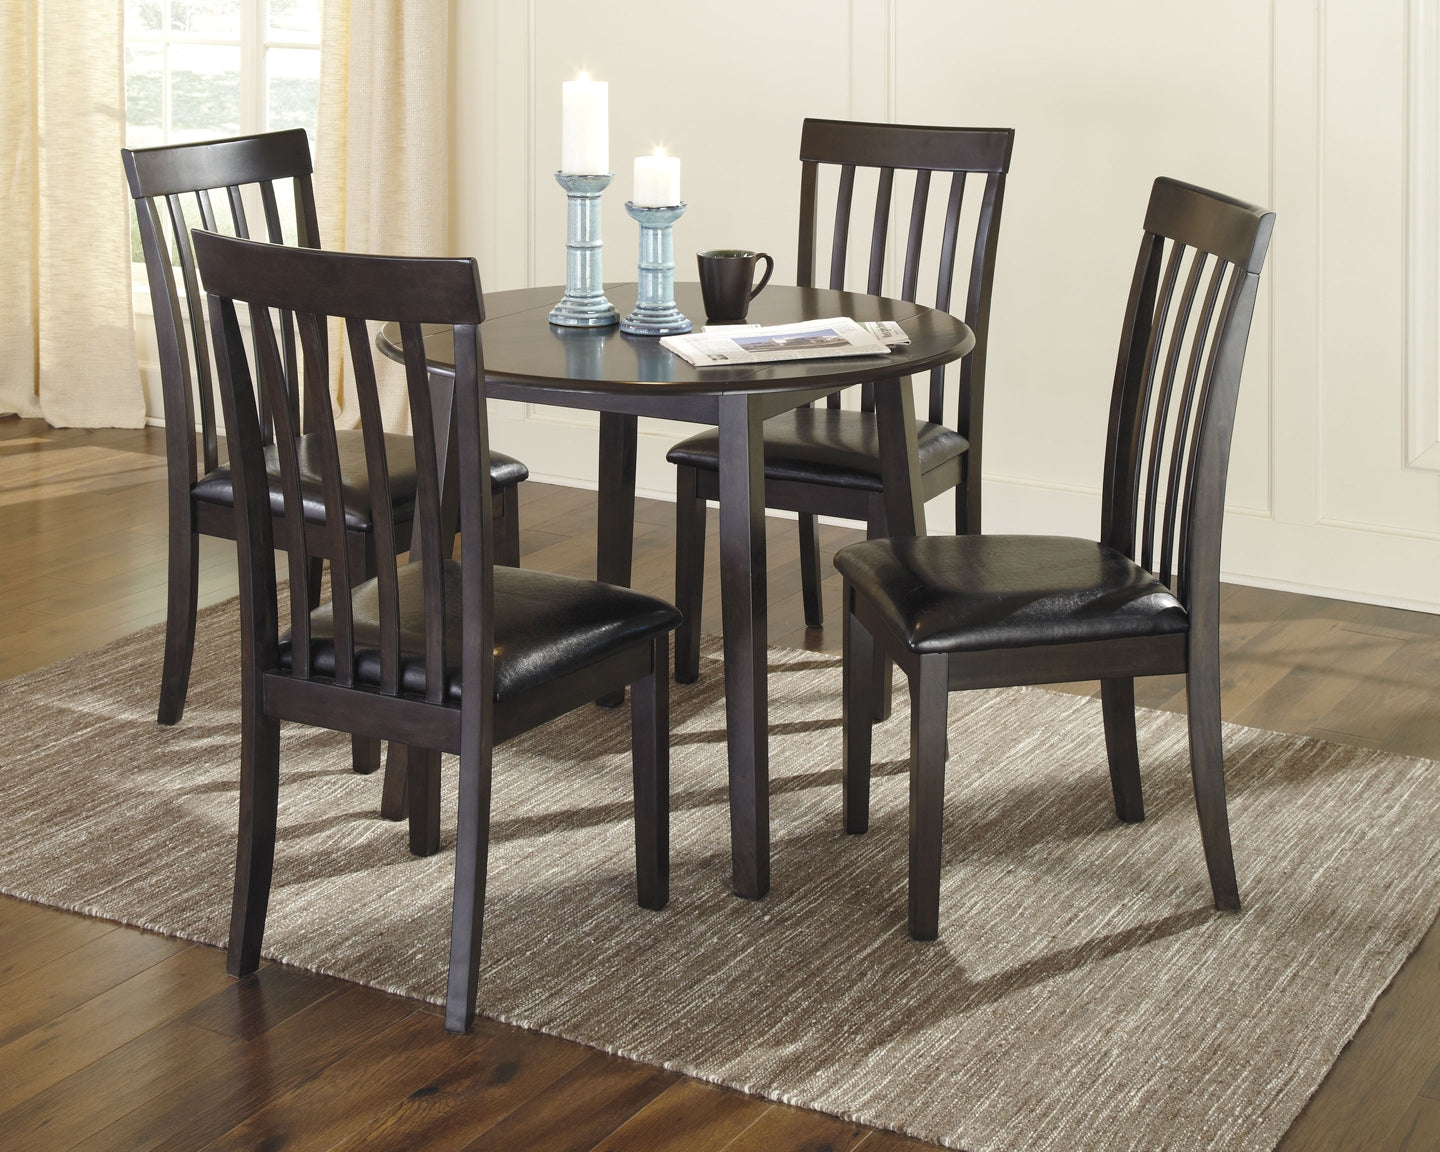 Hammis Dining UPH Side Chair (2/CN) at Walker Mattress and Furniture Locations in Cedar Park and Belton TX.